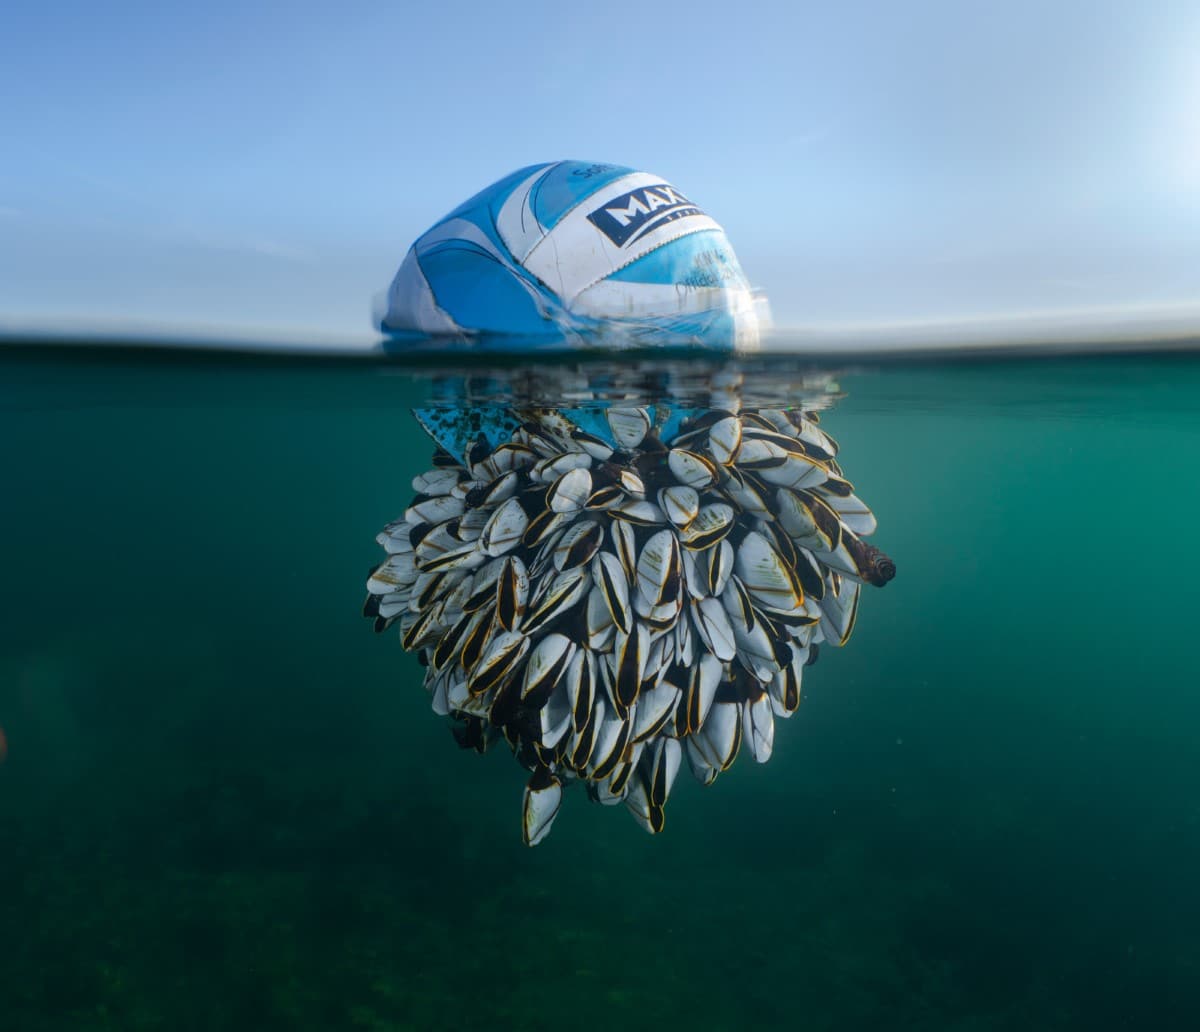 Soccer ball floating in the water with barnacles attached to it